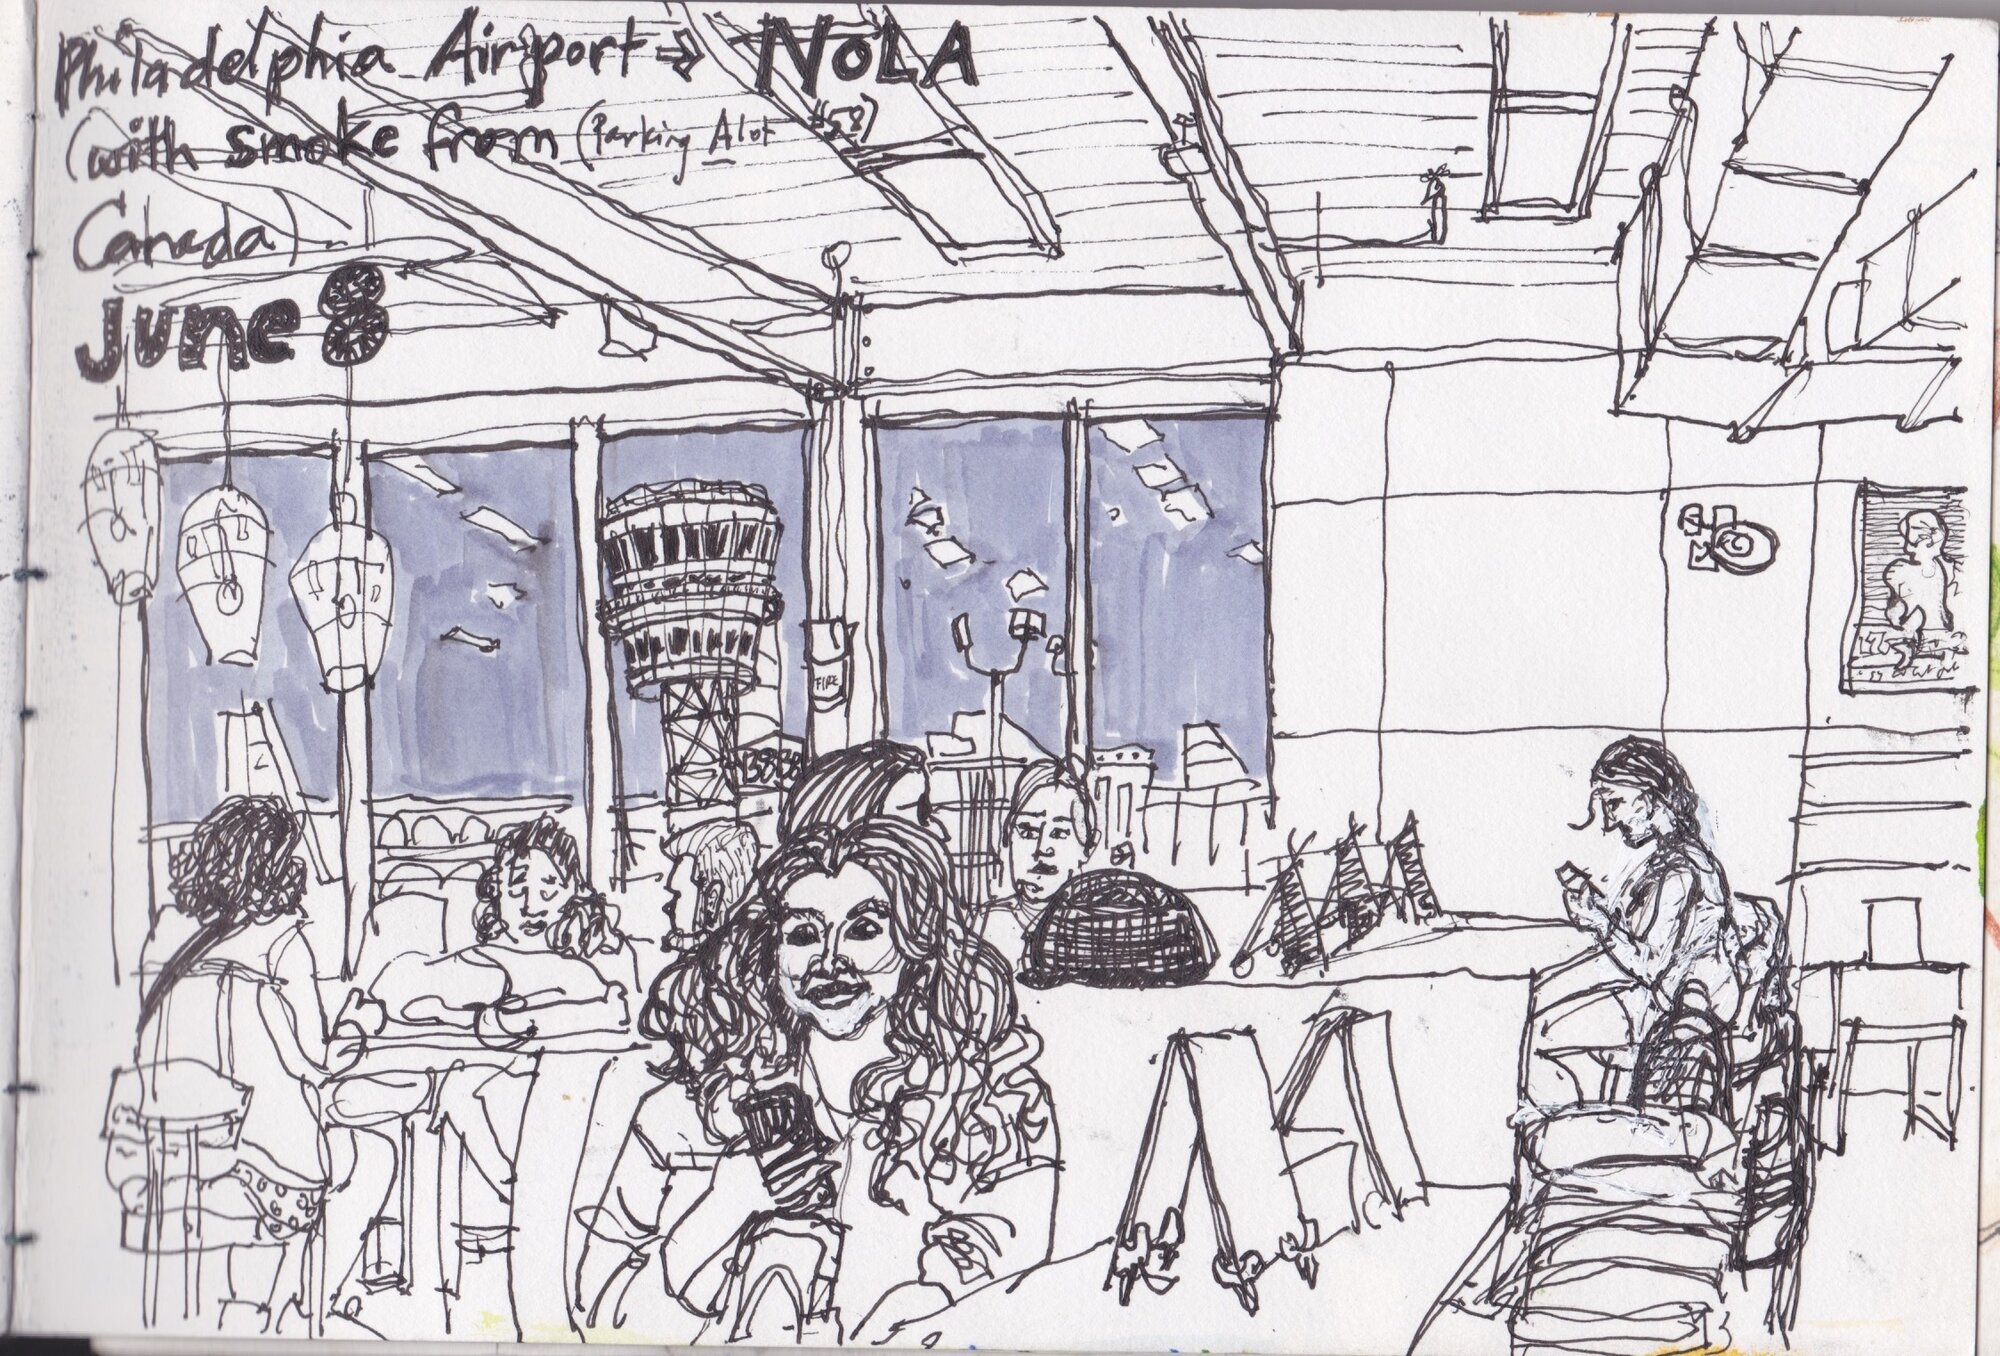 Airport sketch with smoke